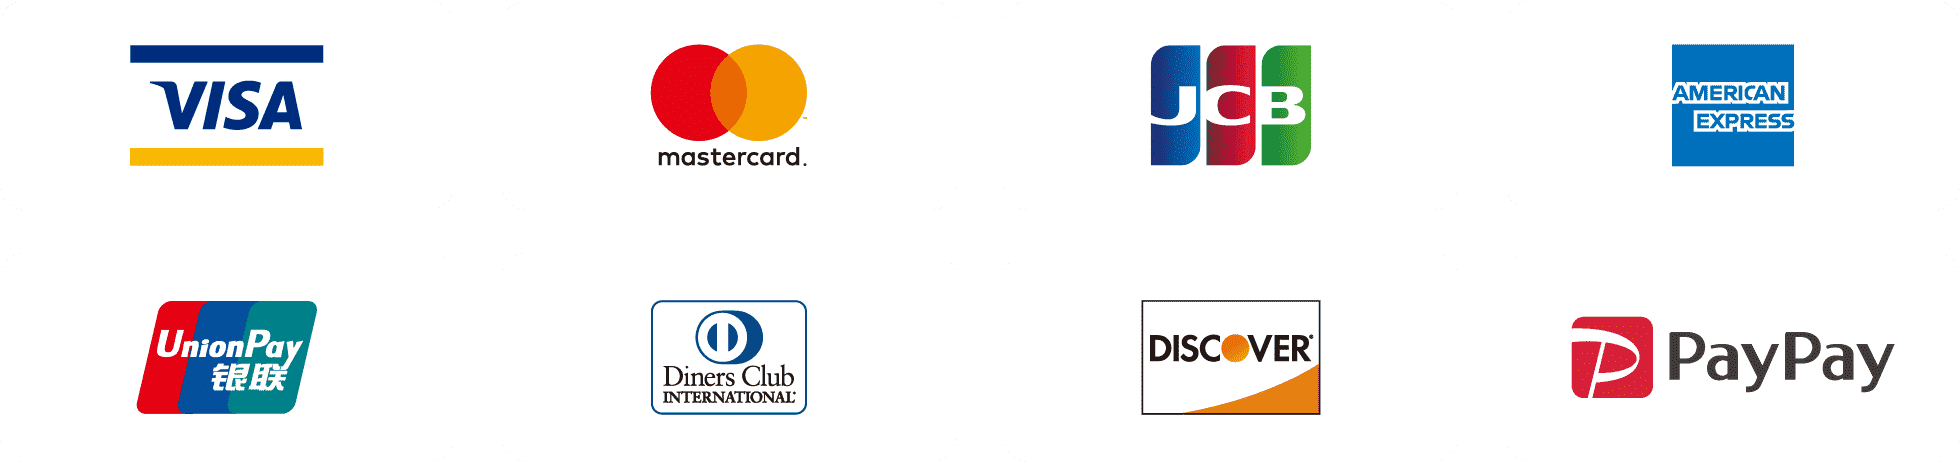 VISA/UnionPay/mastercard/JCB/DISCOVER/AMERICAN EXPRESS/Diners Club/PayPay